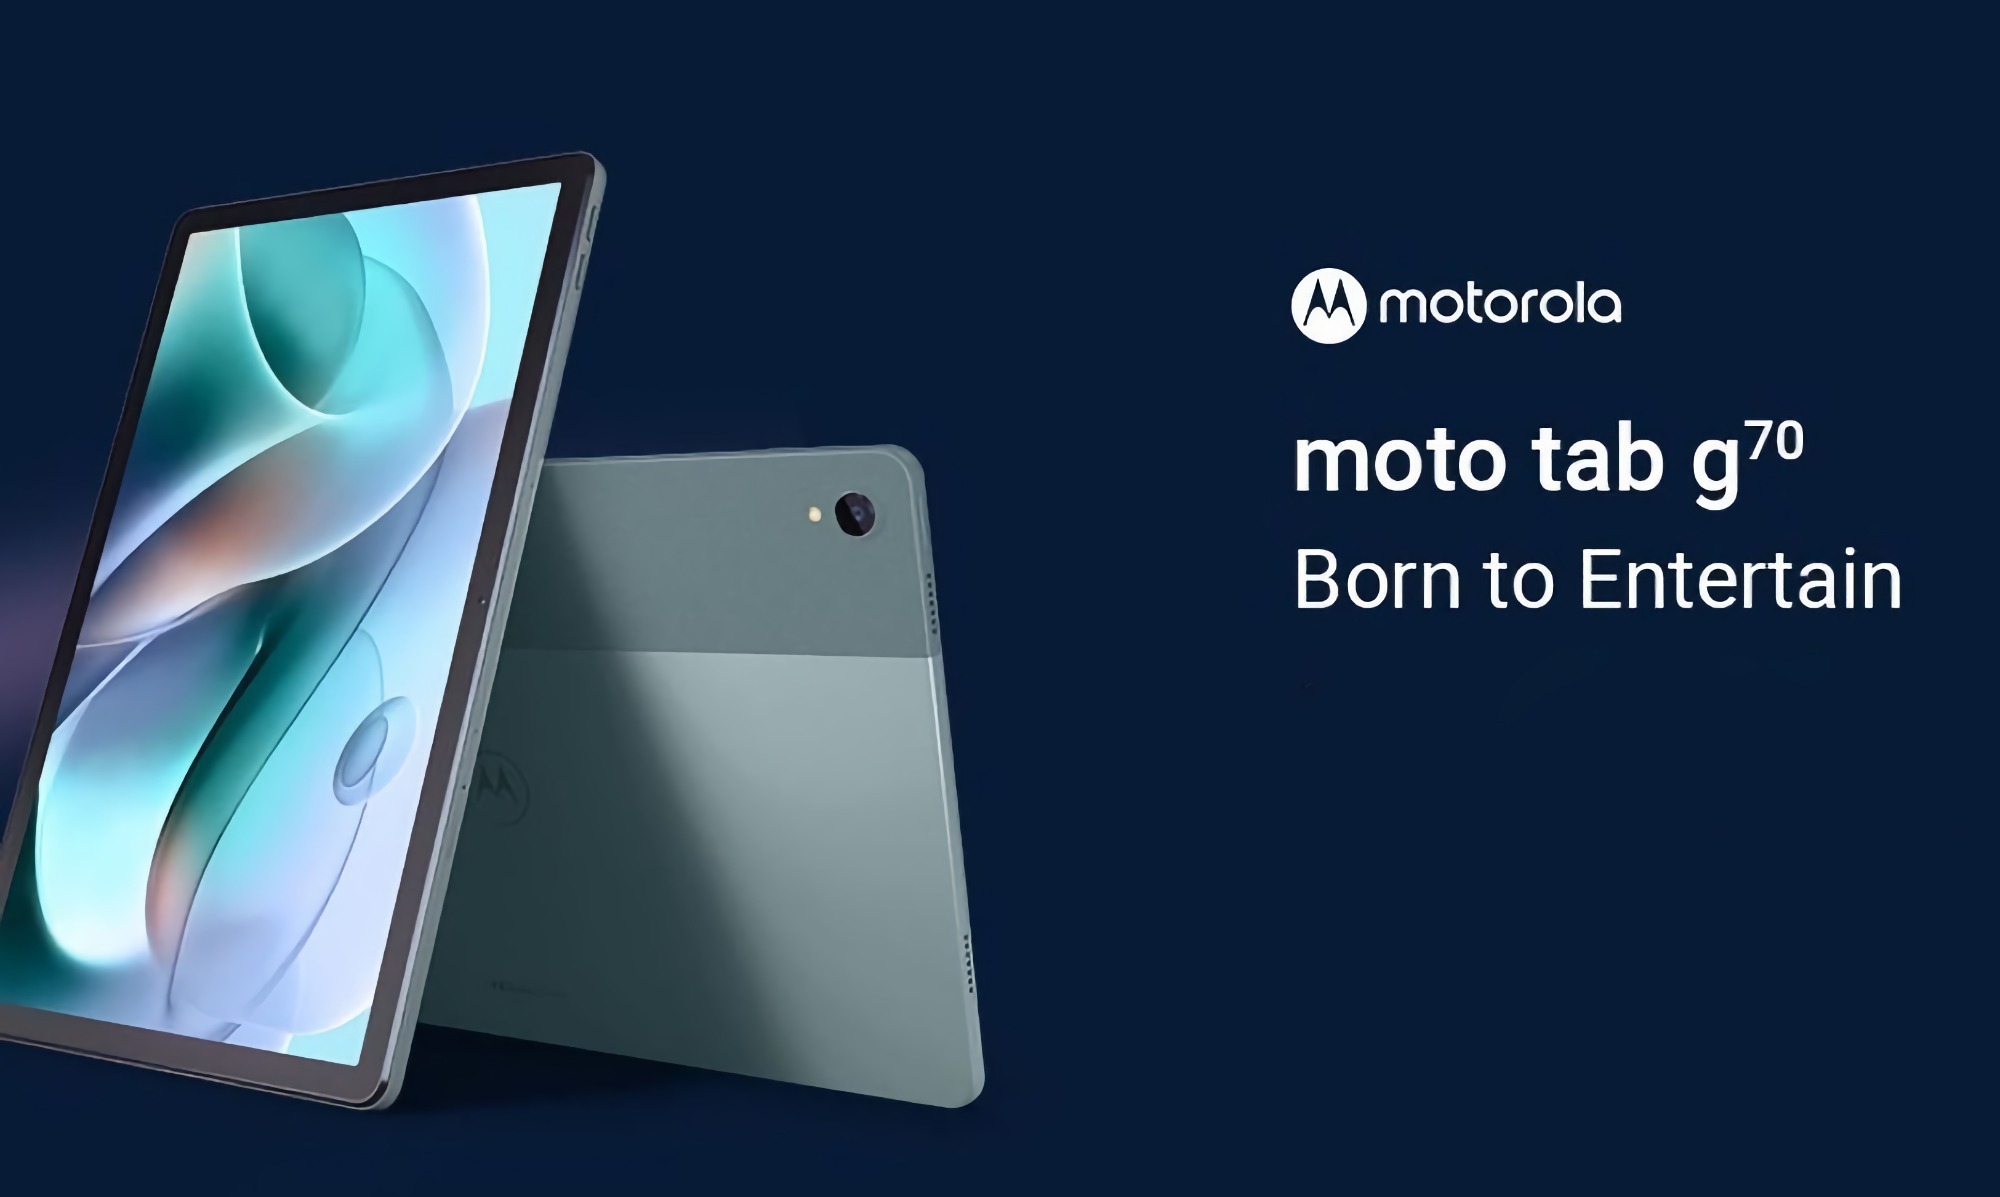 Officially: Motorola will unveil the Moto Tab G70 11-inch tablet with MediaTek chip on January 18